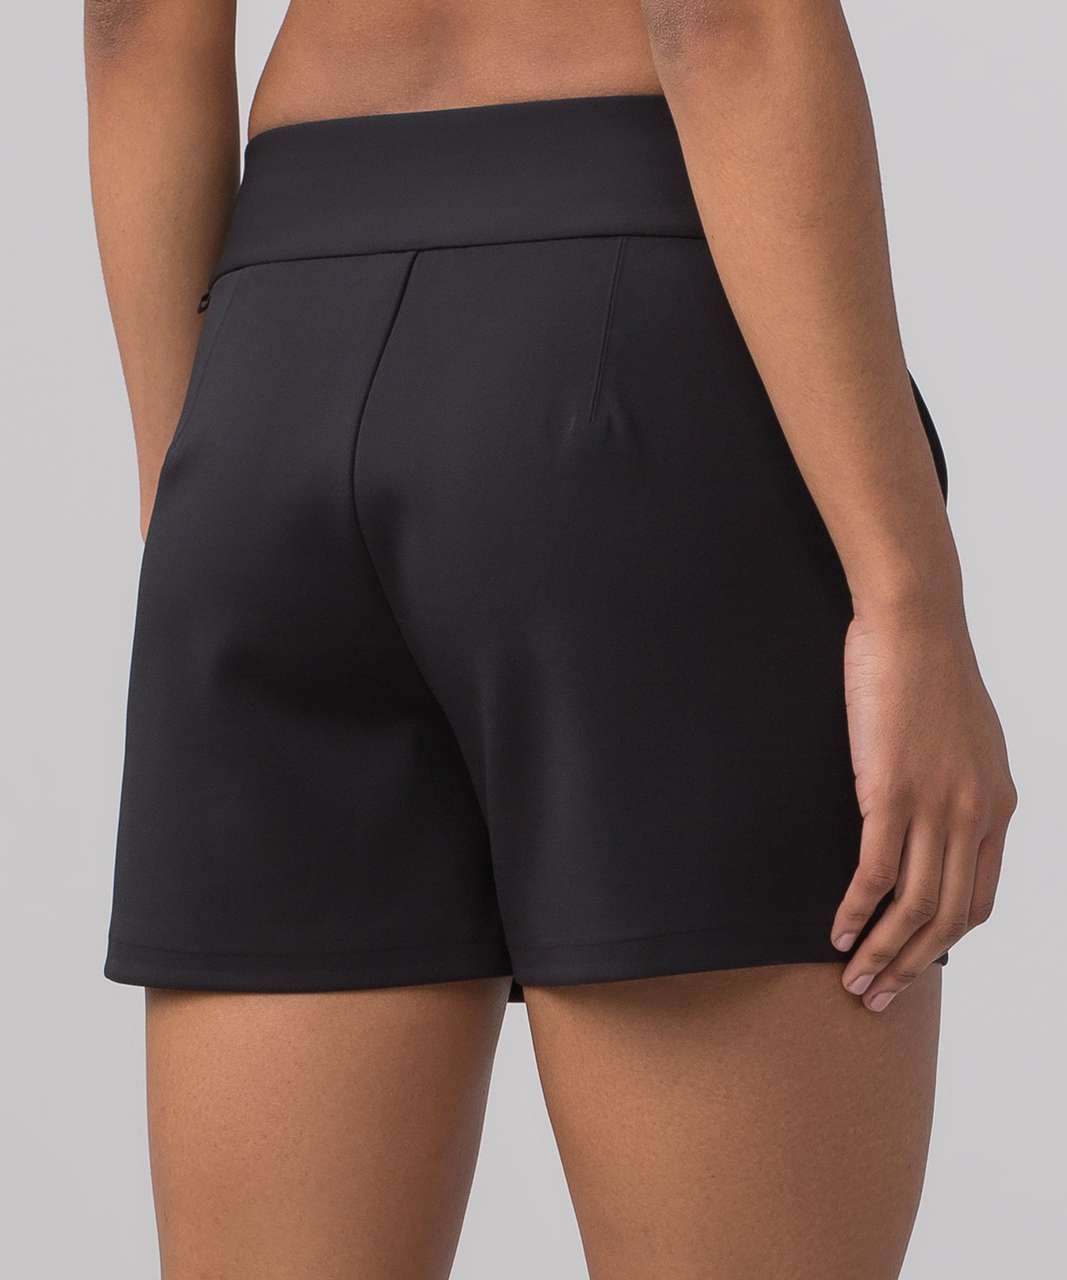 Lululemon Athletica Solid Black Athletic Shorts Size 2 (Tall) - 37% off